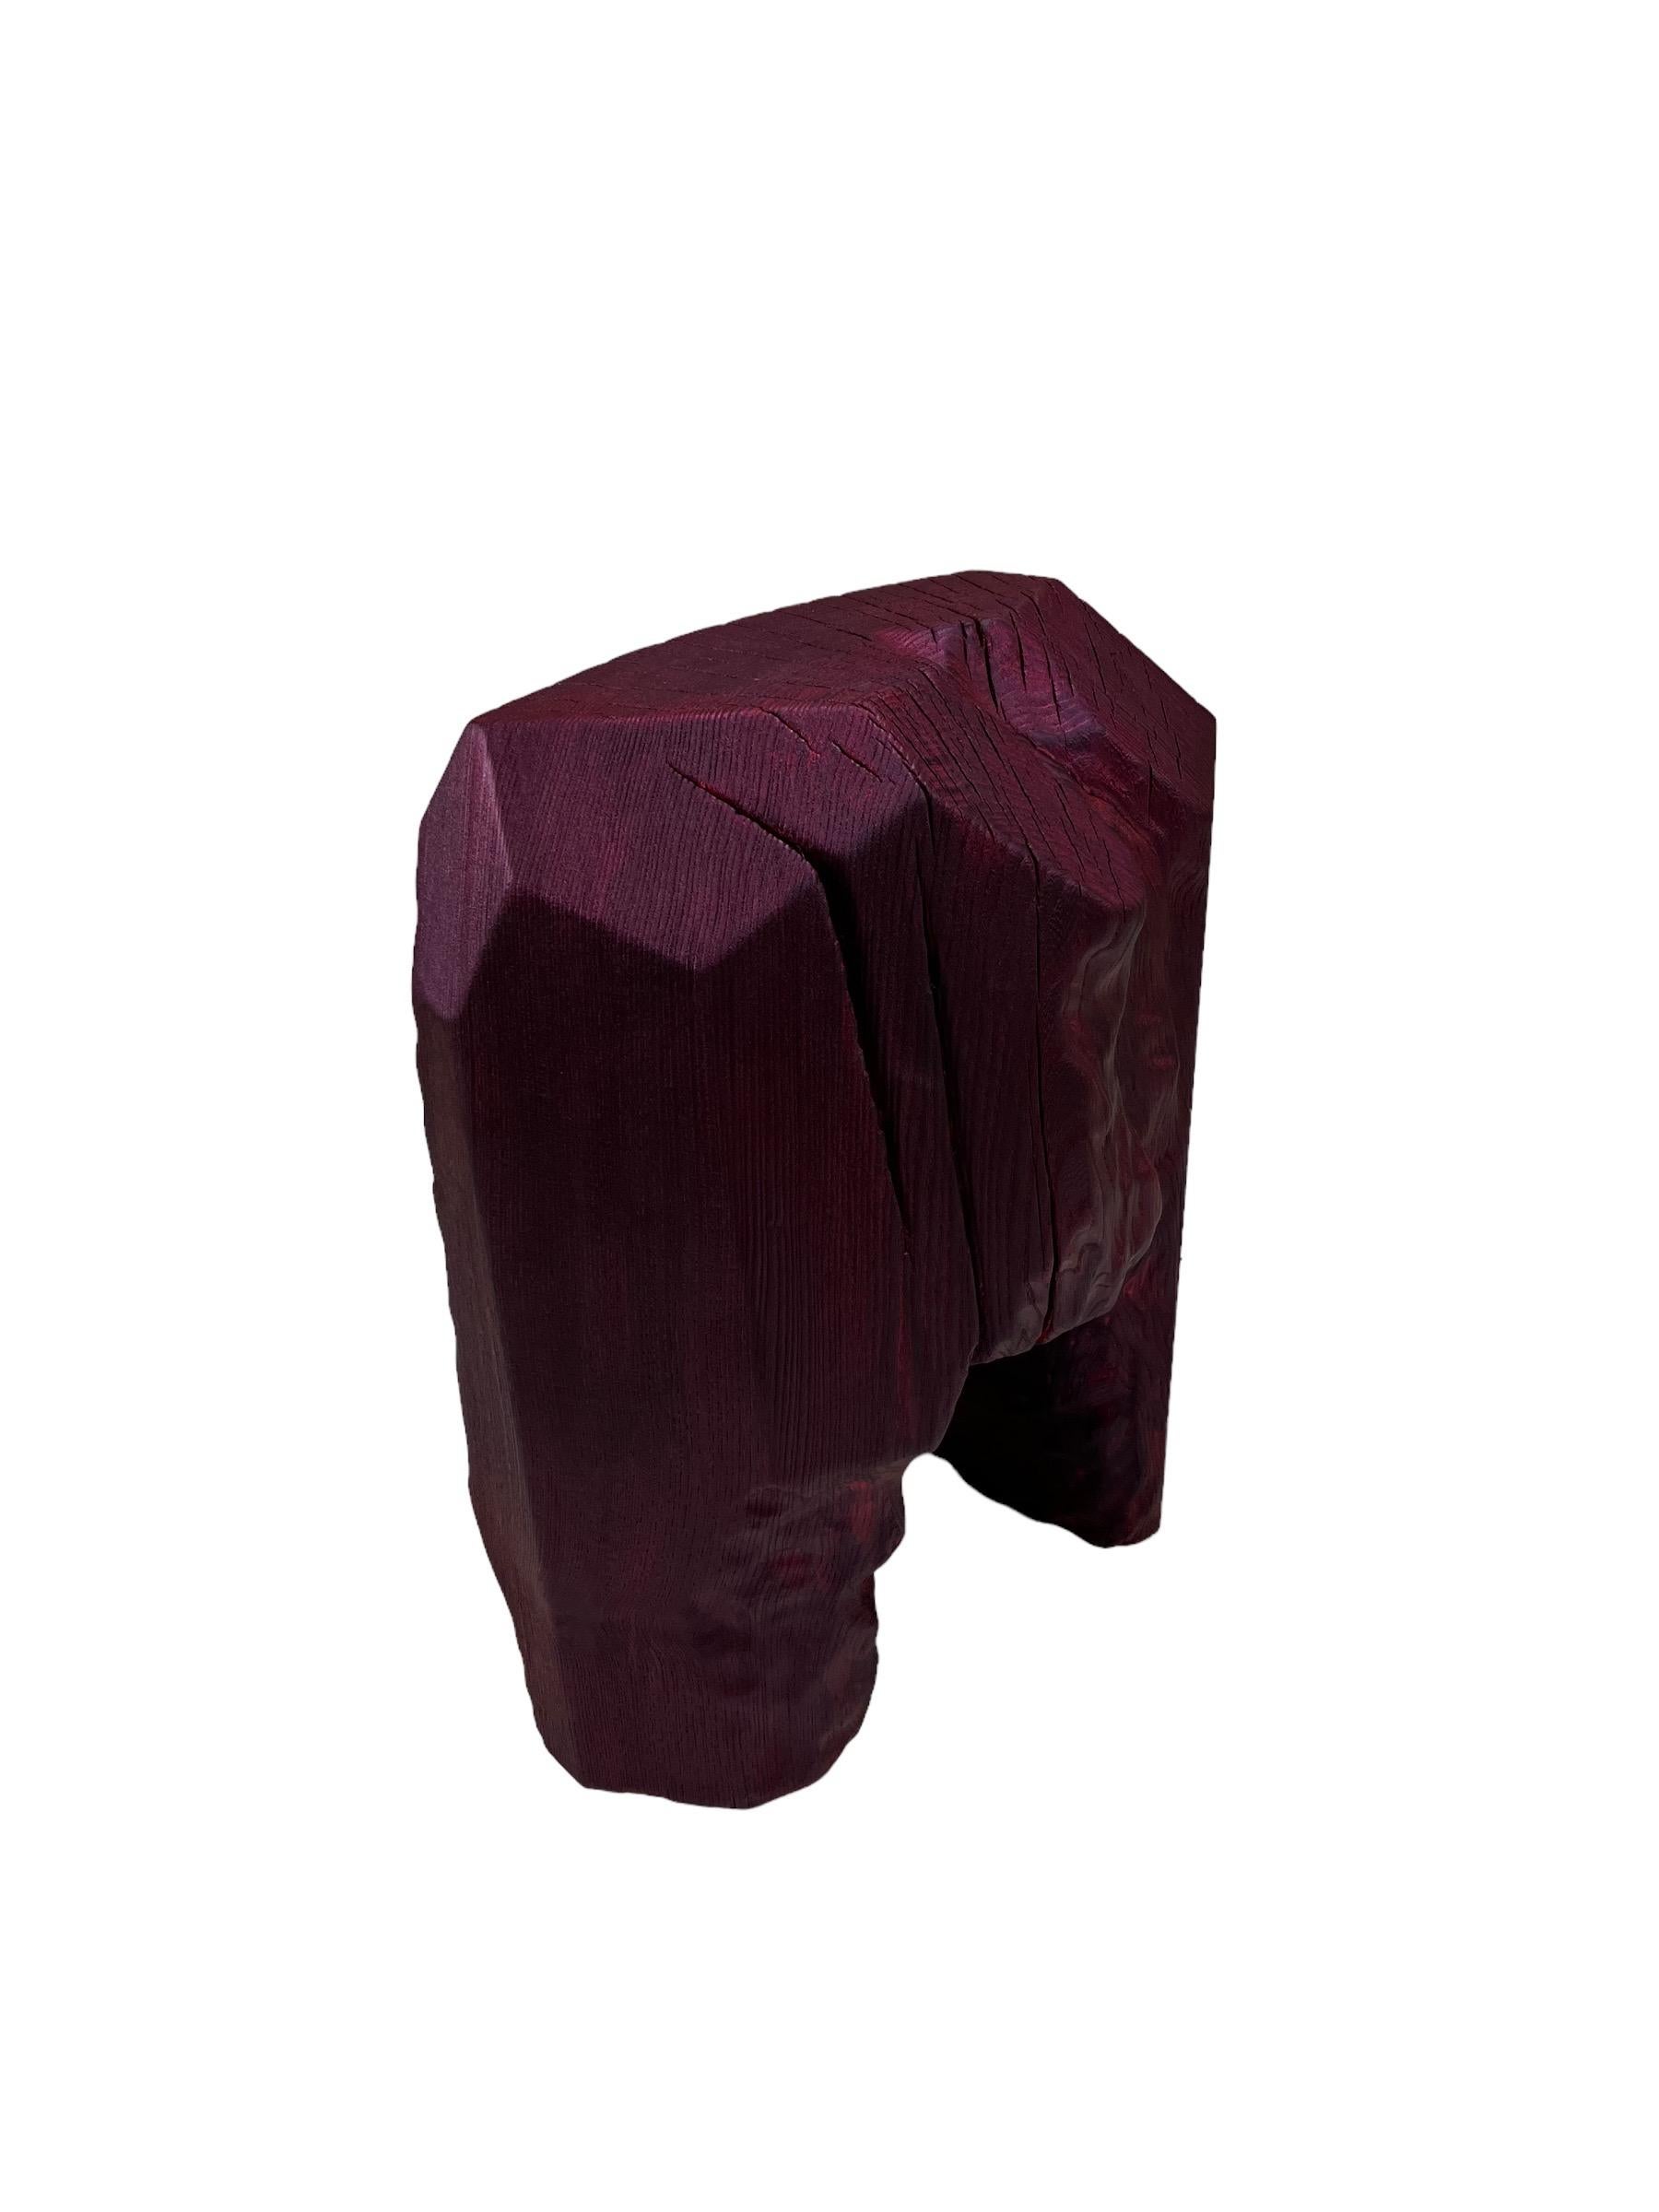 Carved wooden stool from locally sourced elm wood from the lanscape of Småland .
Hand carved by master Swedish woodmaker ELAKFORM. 
Painted by hand with a durable acrylic-based colour and finished with an acrylic lacquer.
The special Burgundy paint